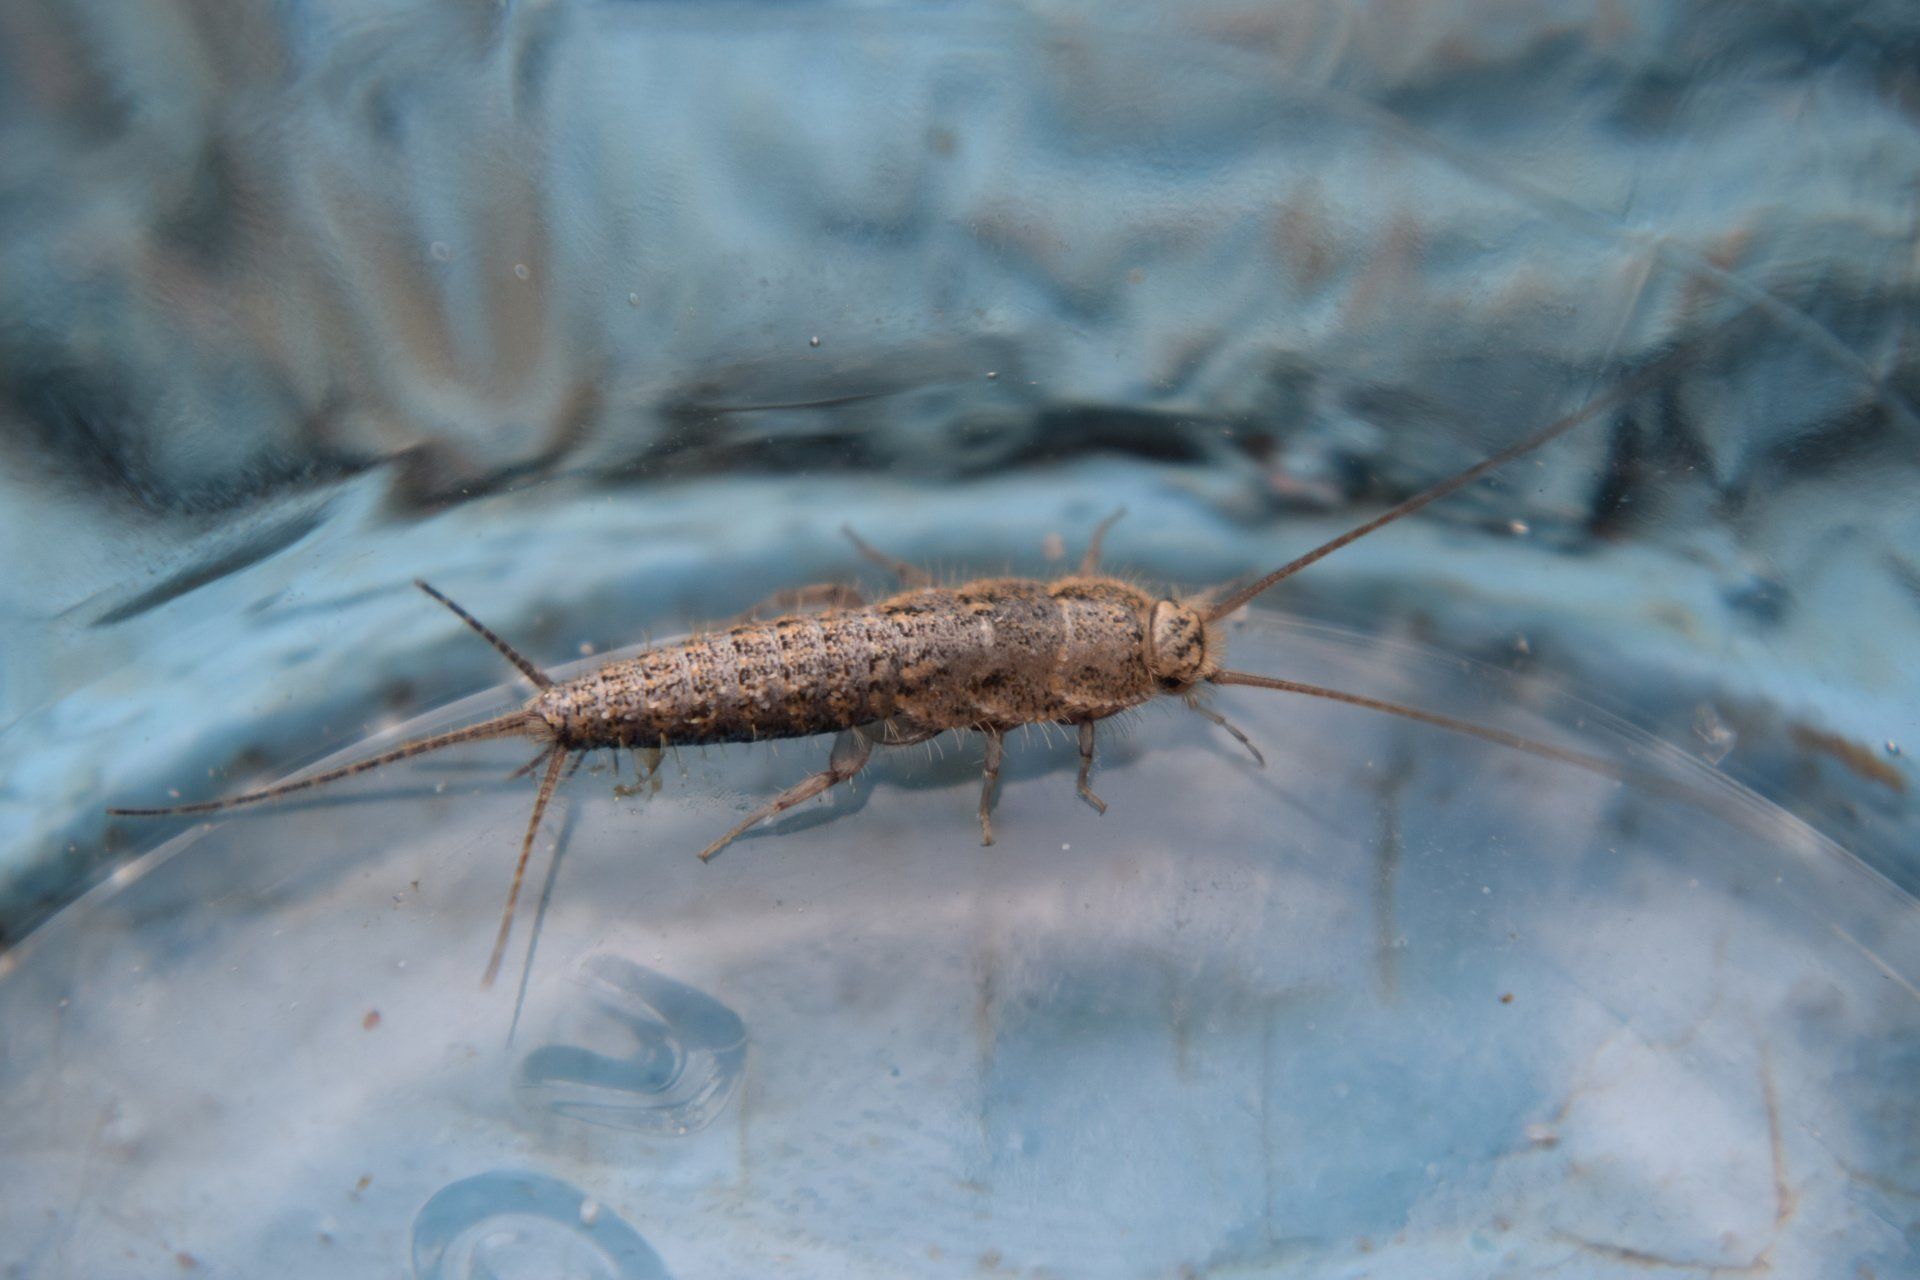 Download our  Silverfish  Information  Sheet, image of a silverfish